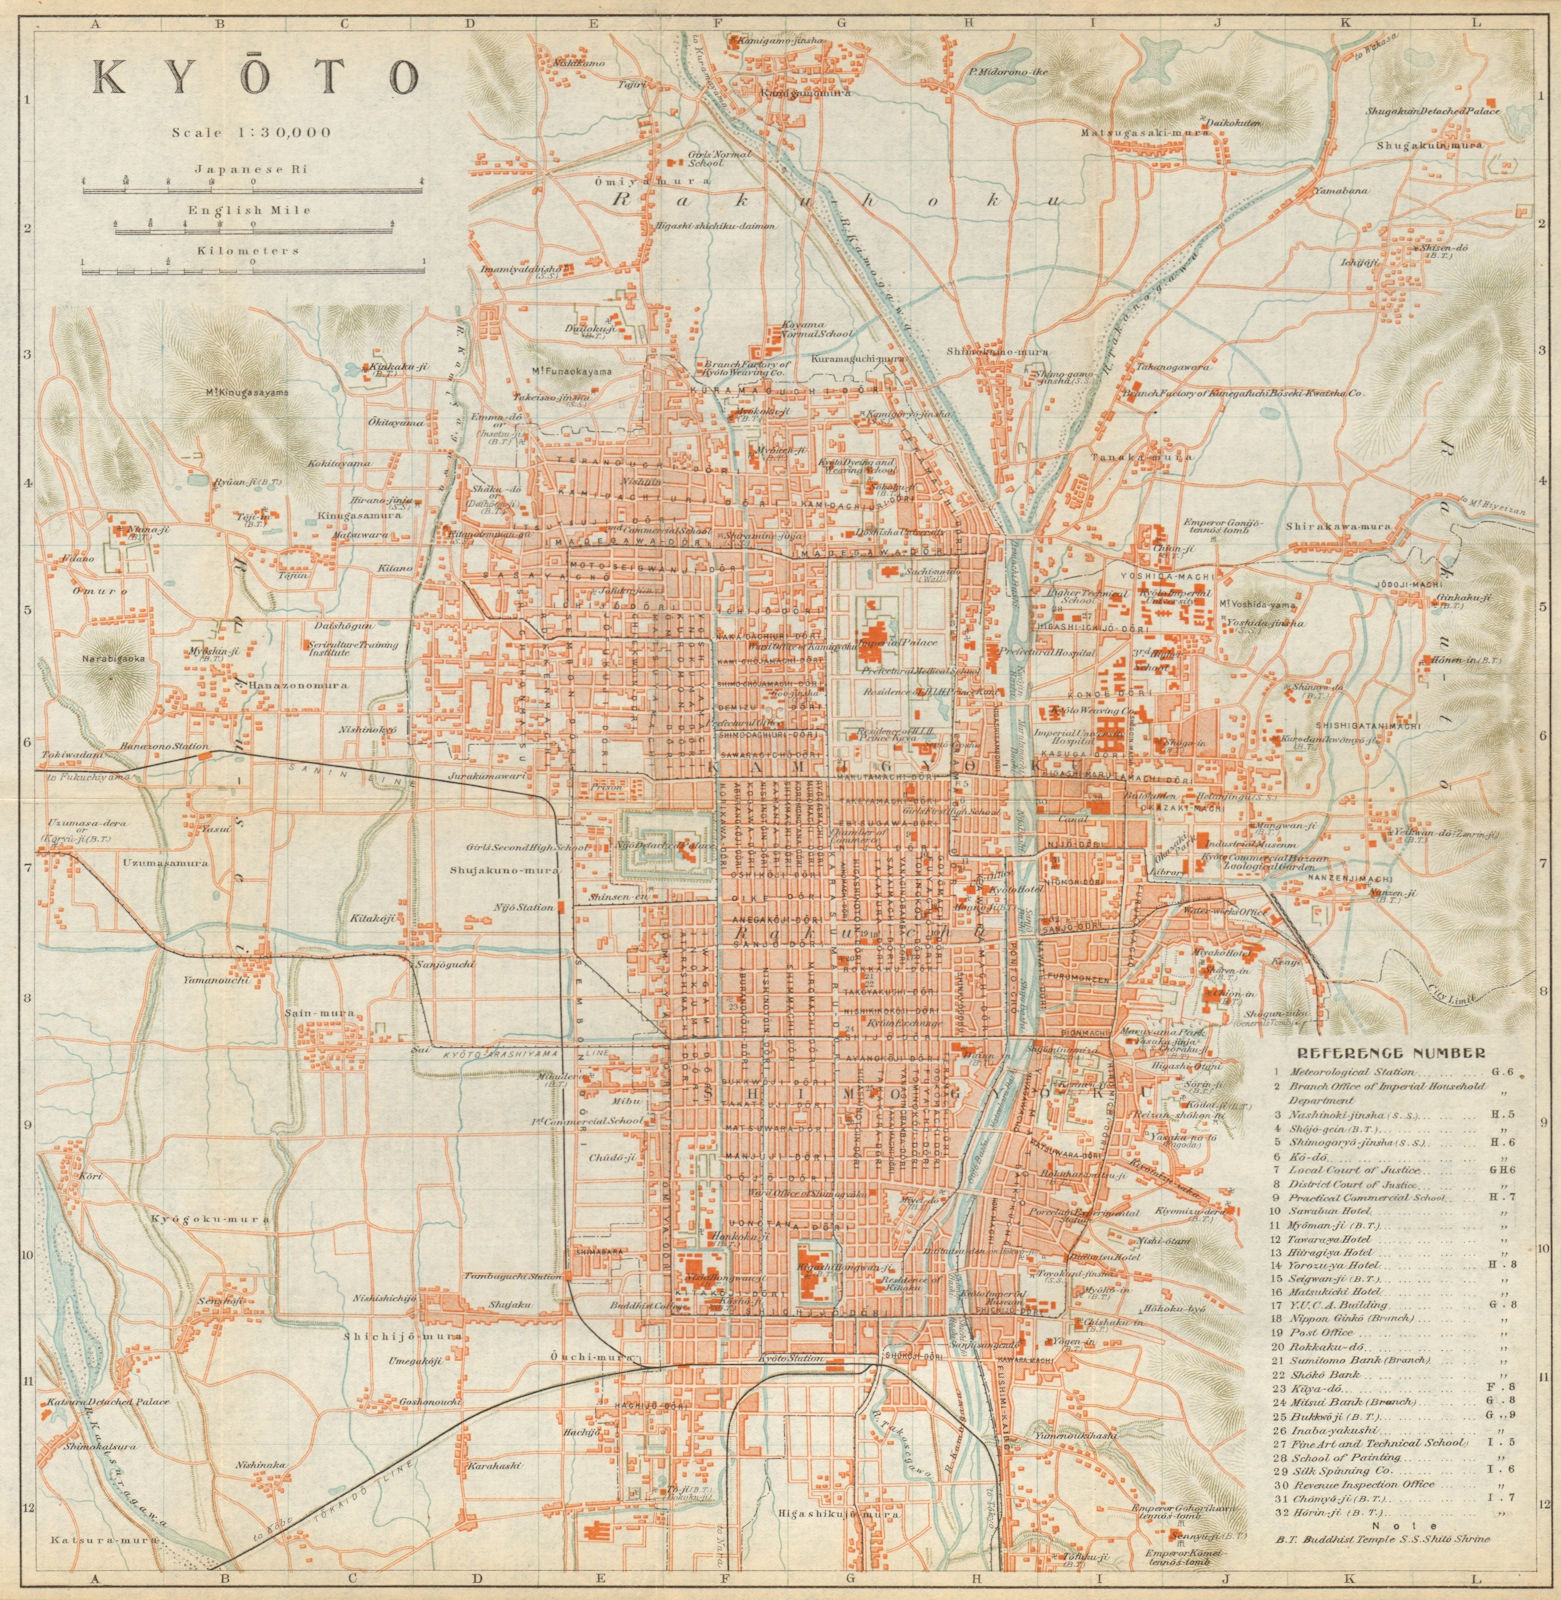 Associate Product Kyoto antique town city plan. Japan 1914 old vintage map chart